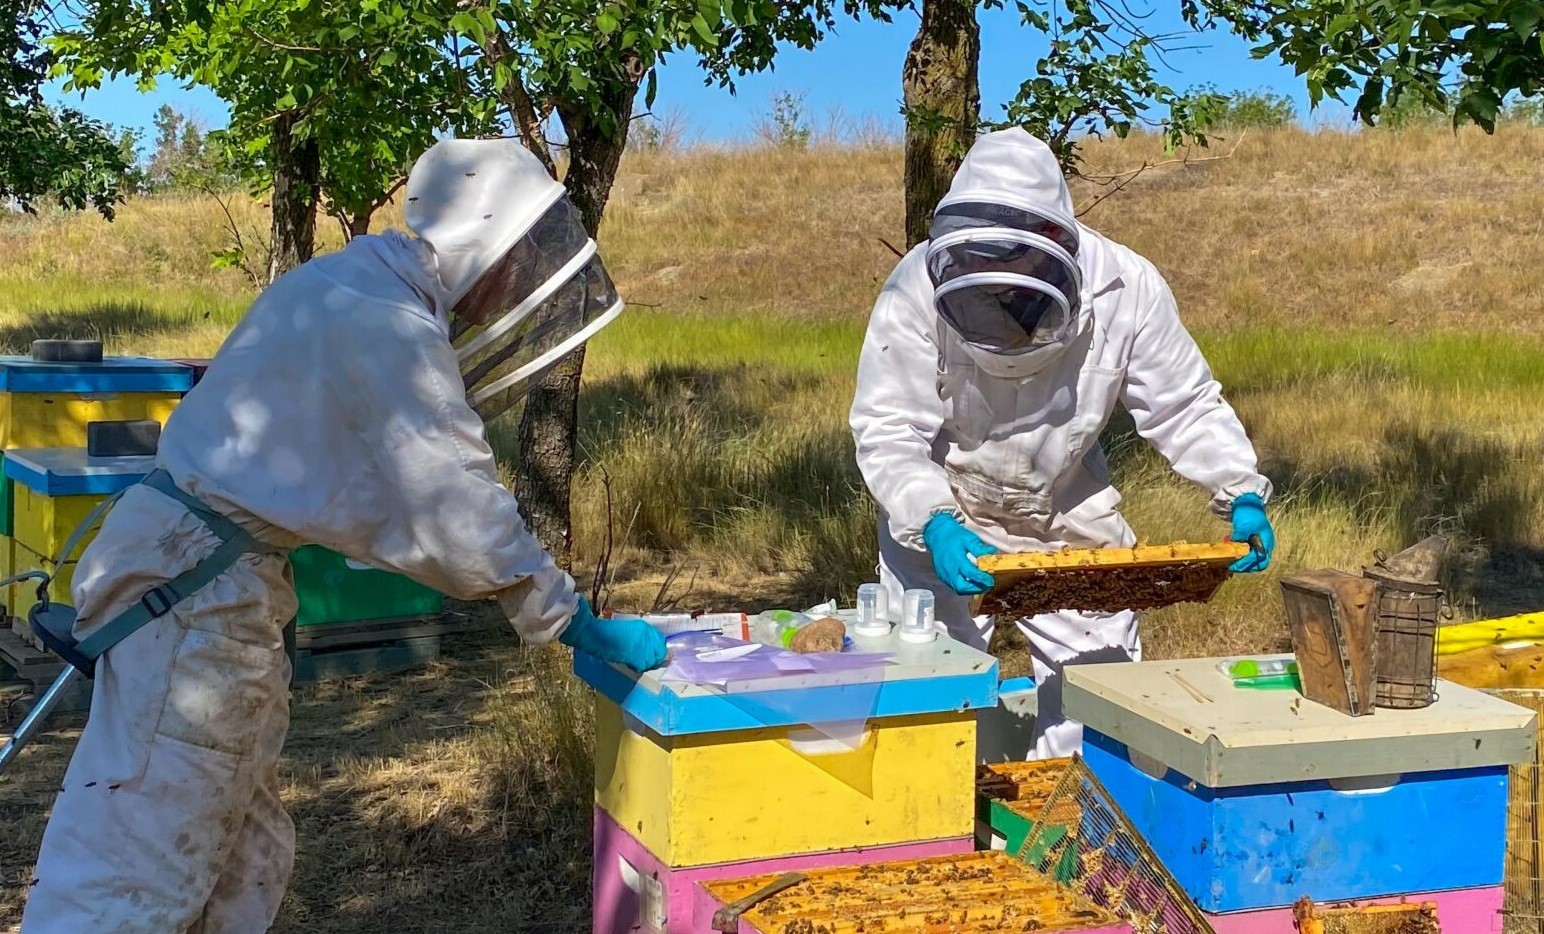 A beekeeper samples pollen from the comb of a honey bee hive from a colony located near canola crops in Lethbridge, Alberta for the BeeCSI project.